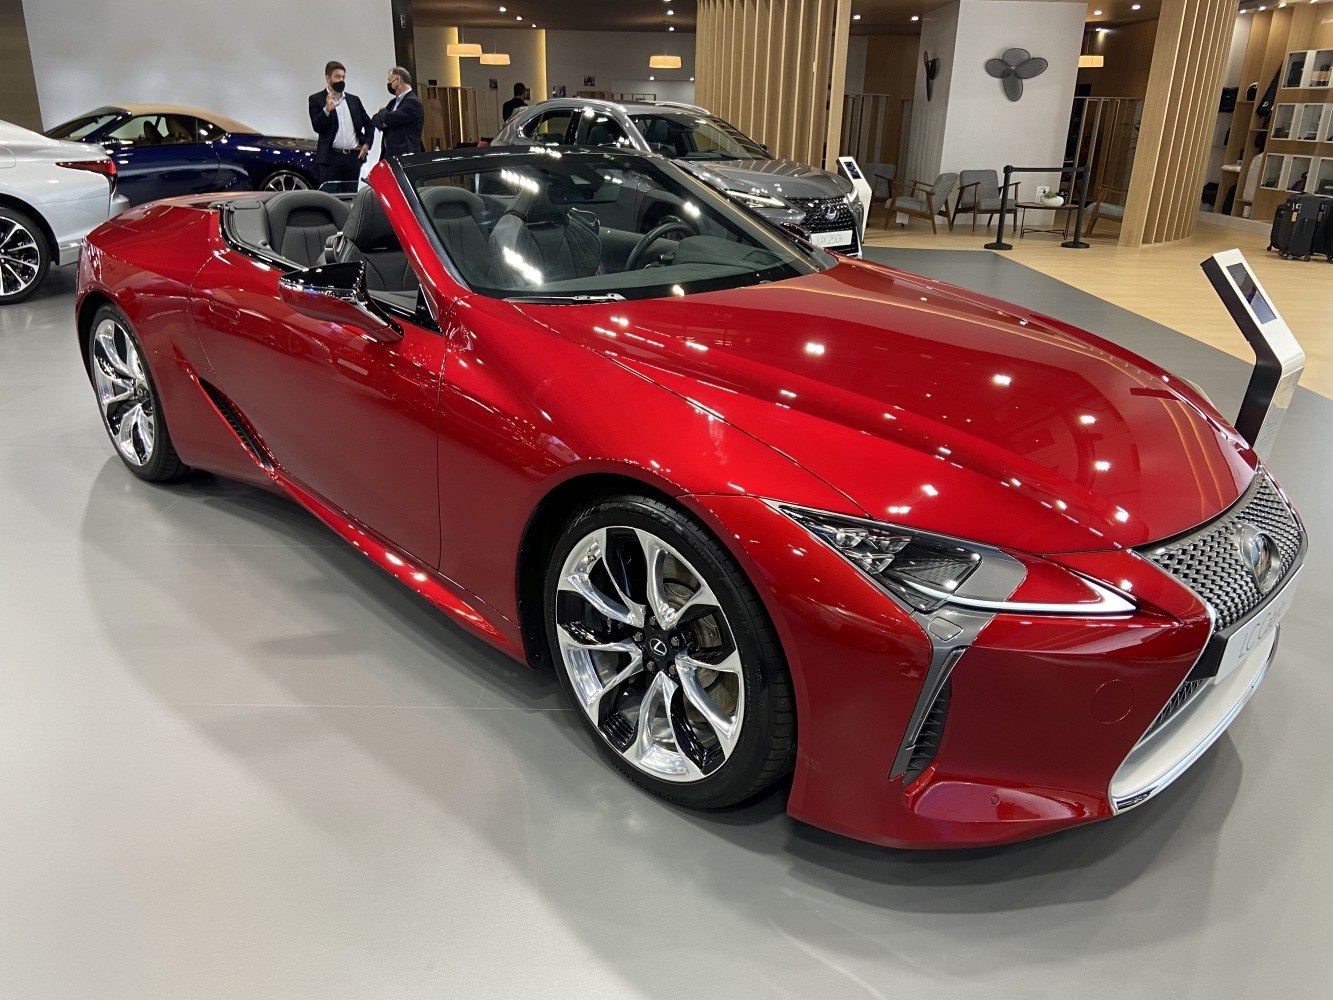 https://totalrenting.es/wp-content/uploads/2022/10/lexus-lc-convertible-2021-500-v8-477-cv-automatic-cabriolet-2.png